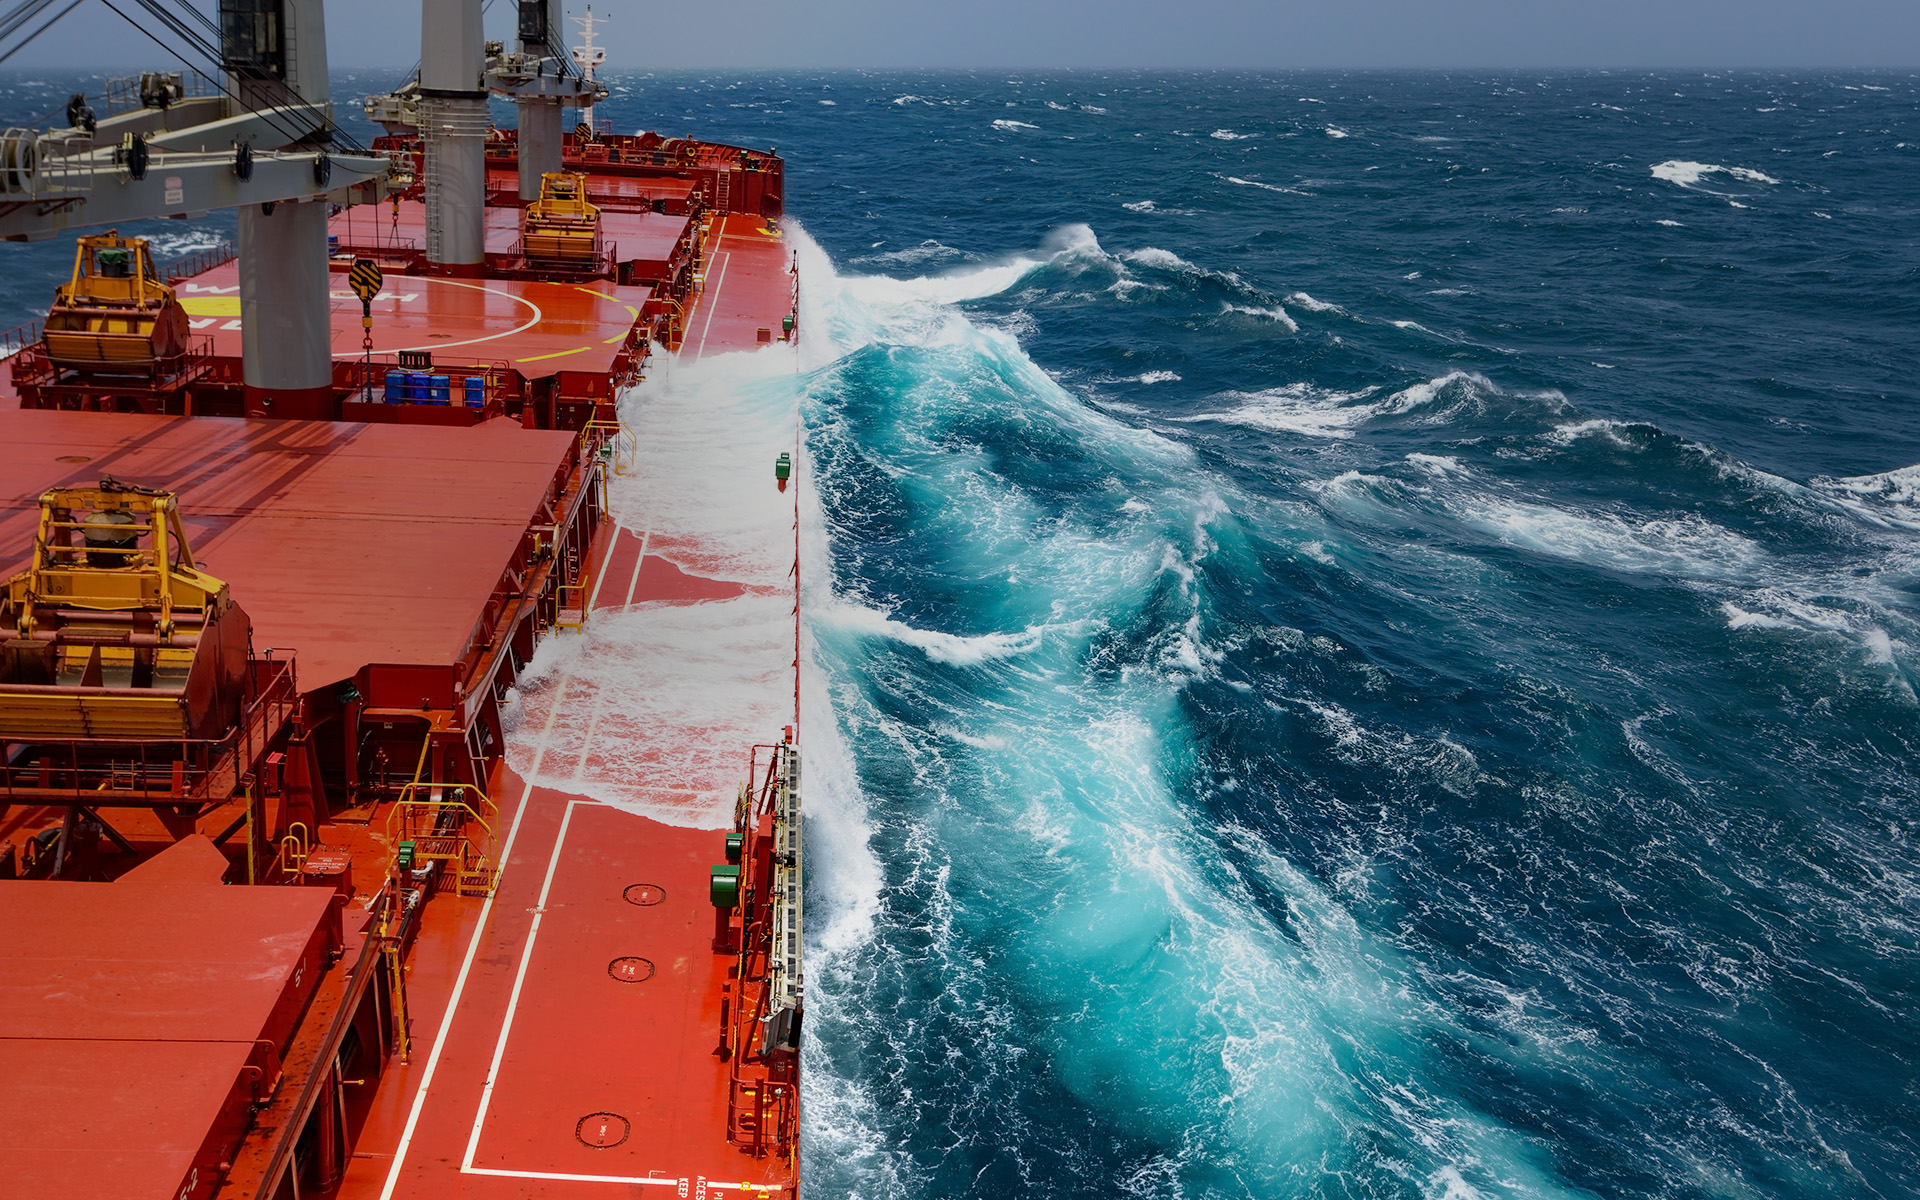 BBG and H&P to create an alliance for bulker segment